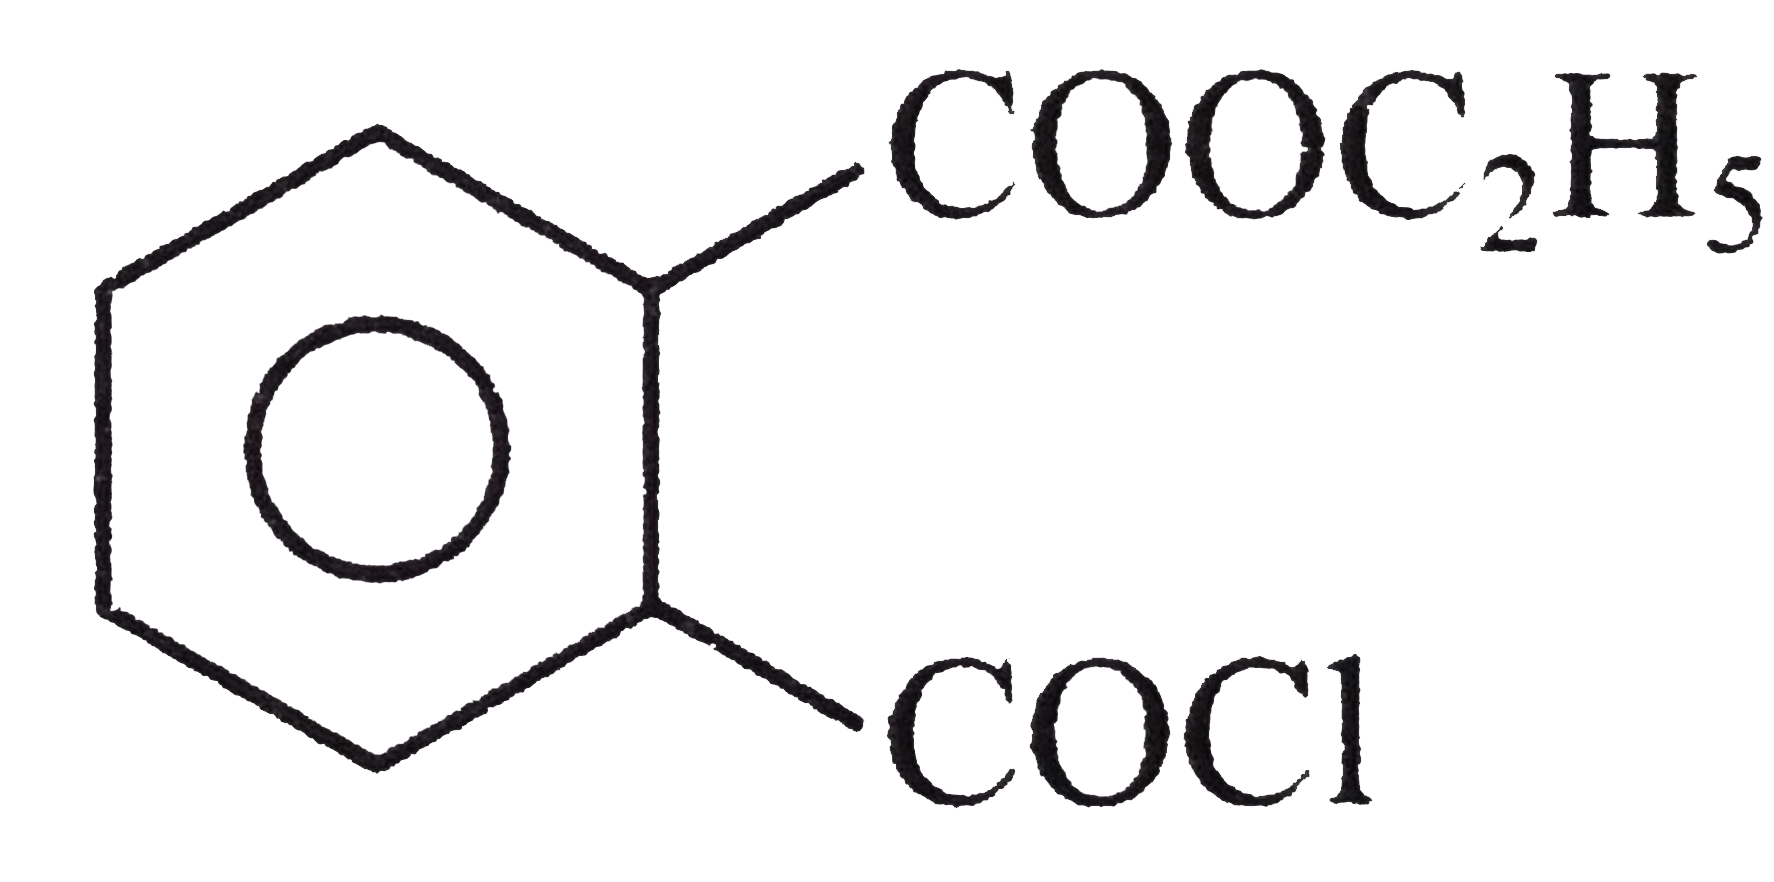 The IUPAC name of the compound is